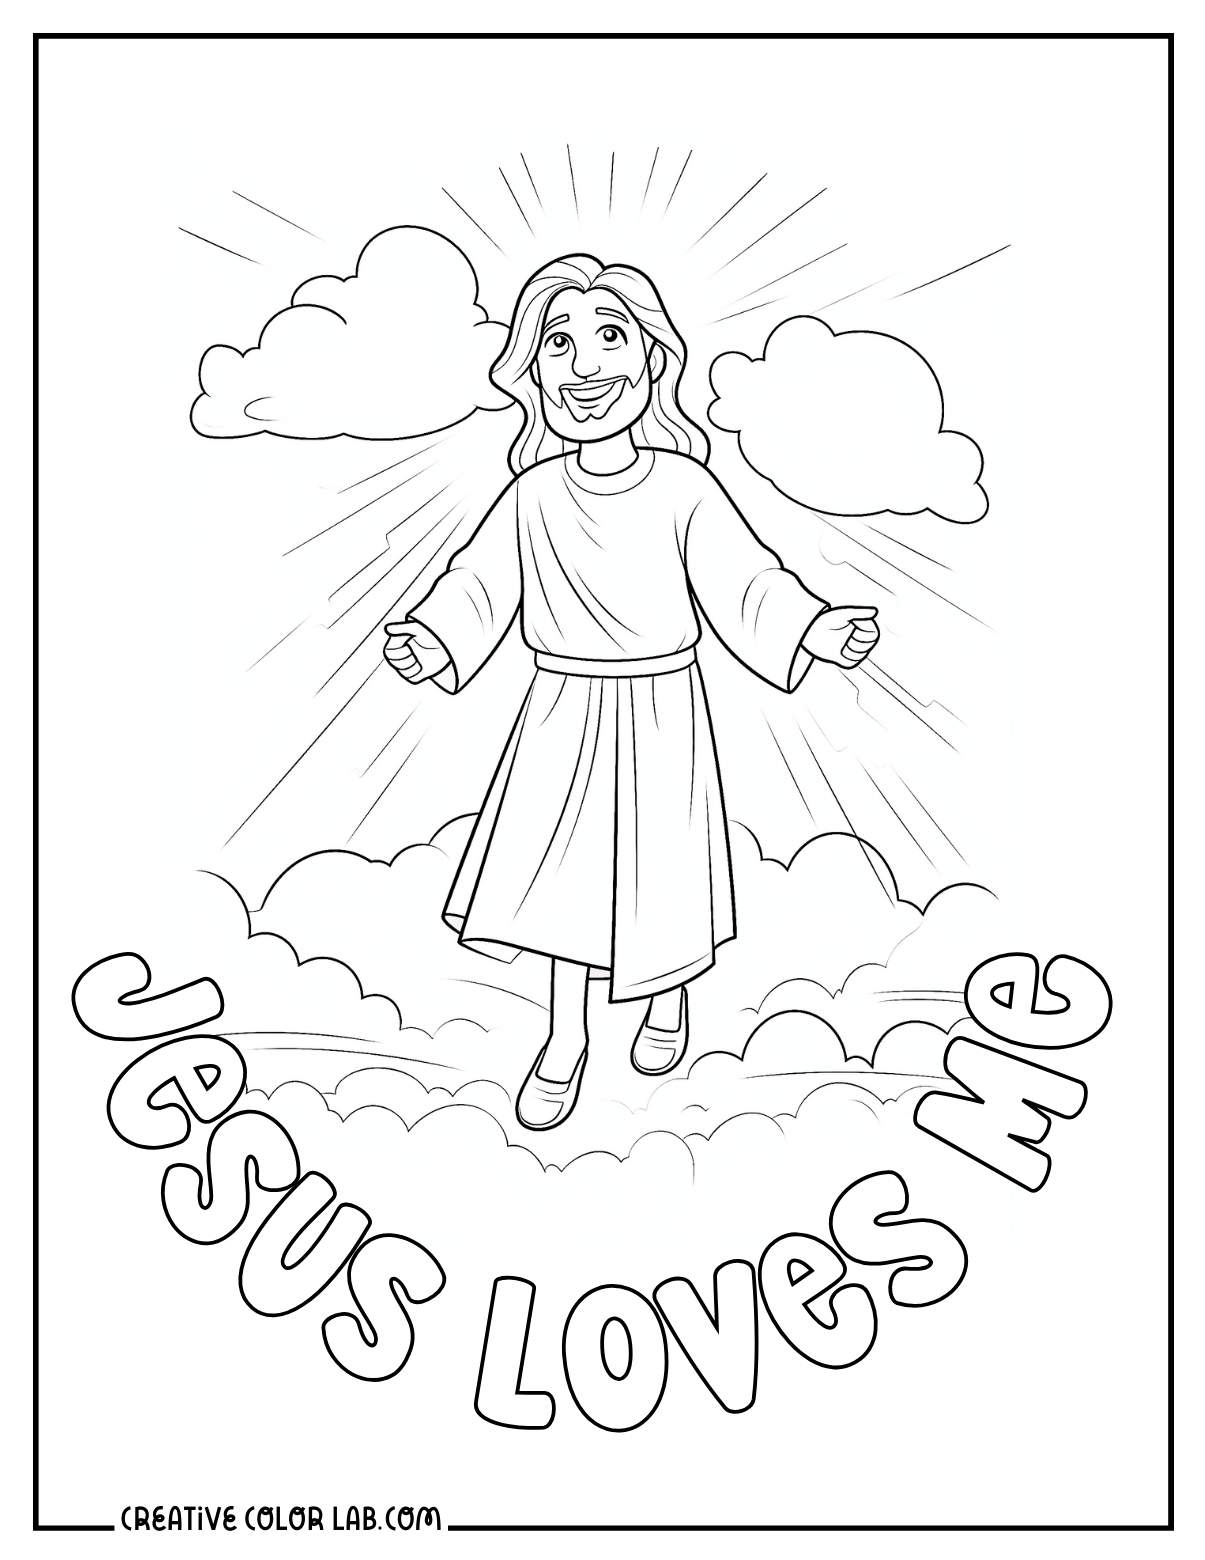 Jesus loves me picture to color for sunday school preschool.